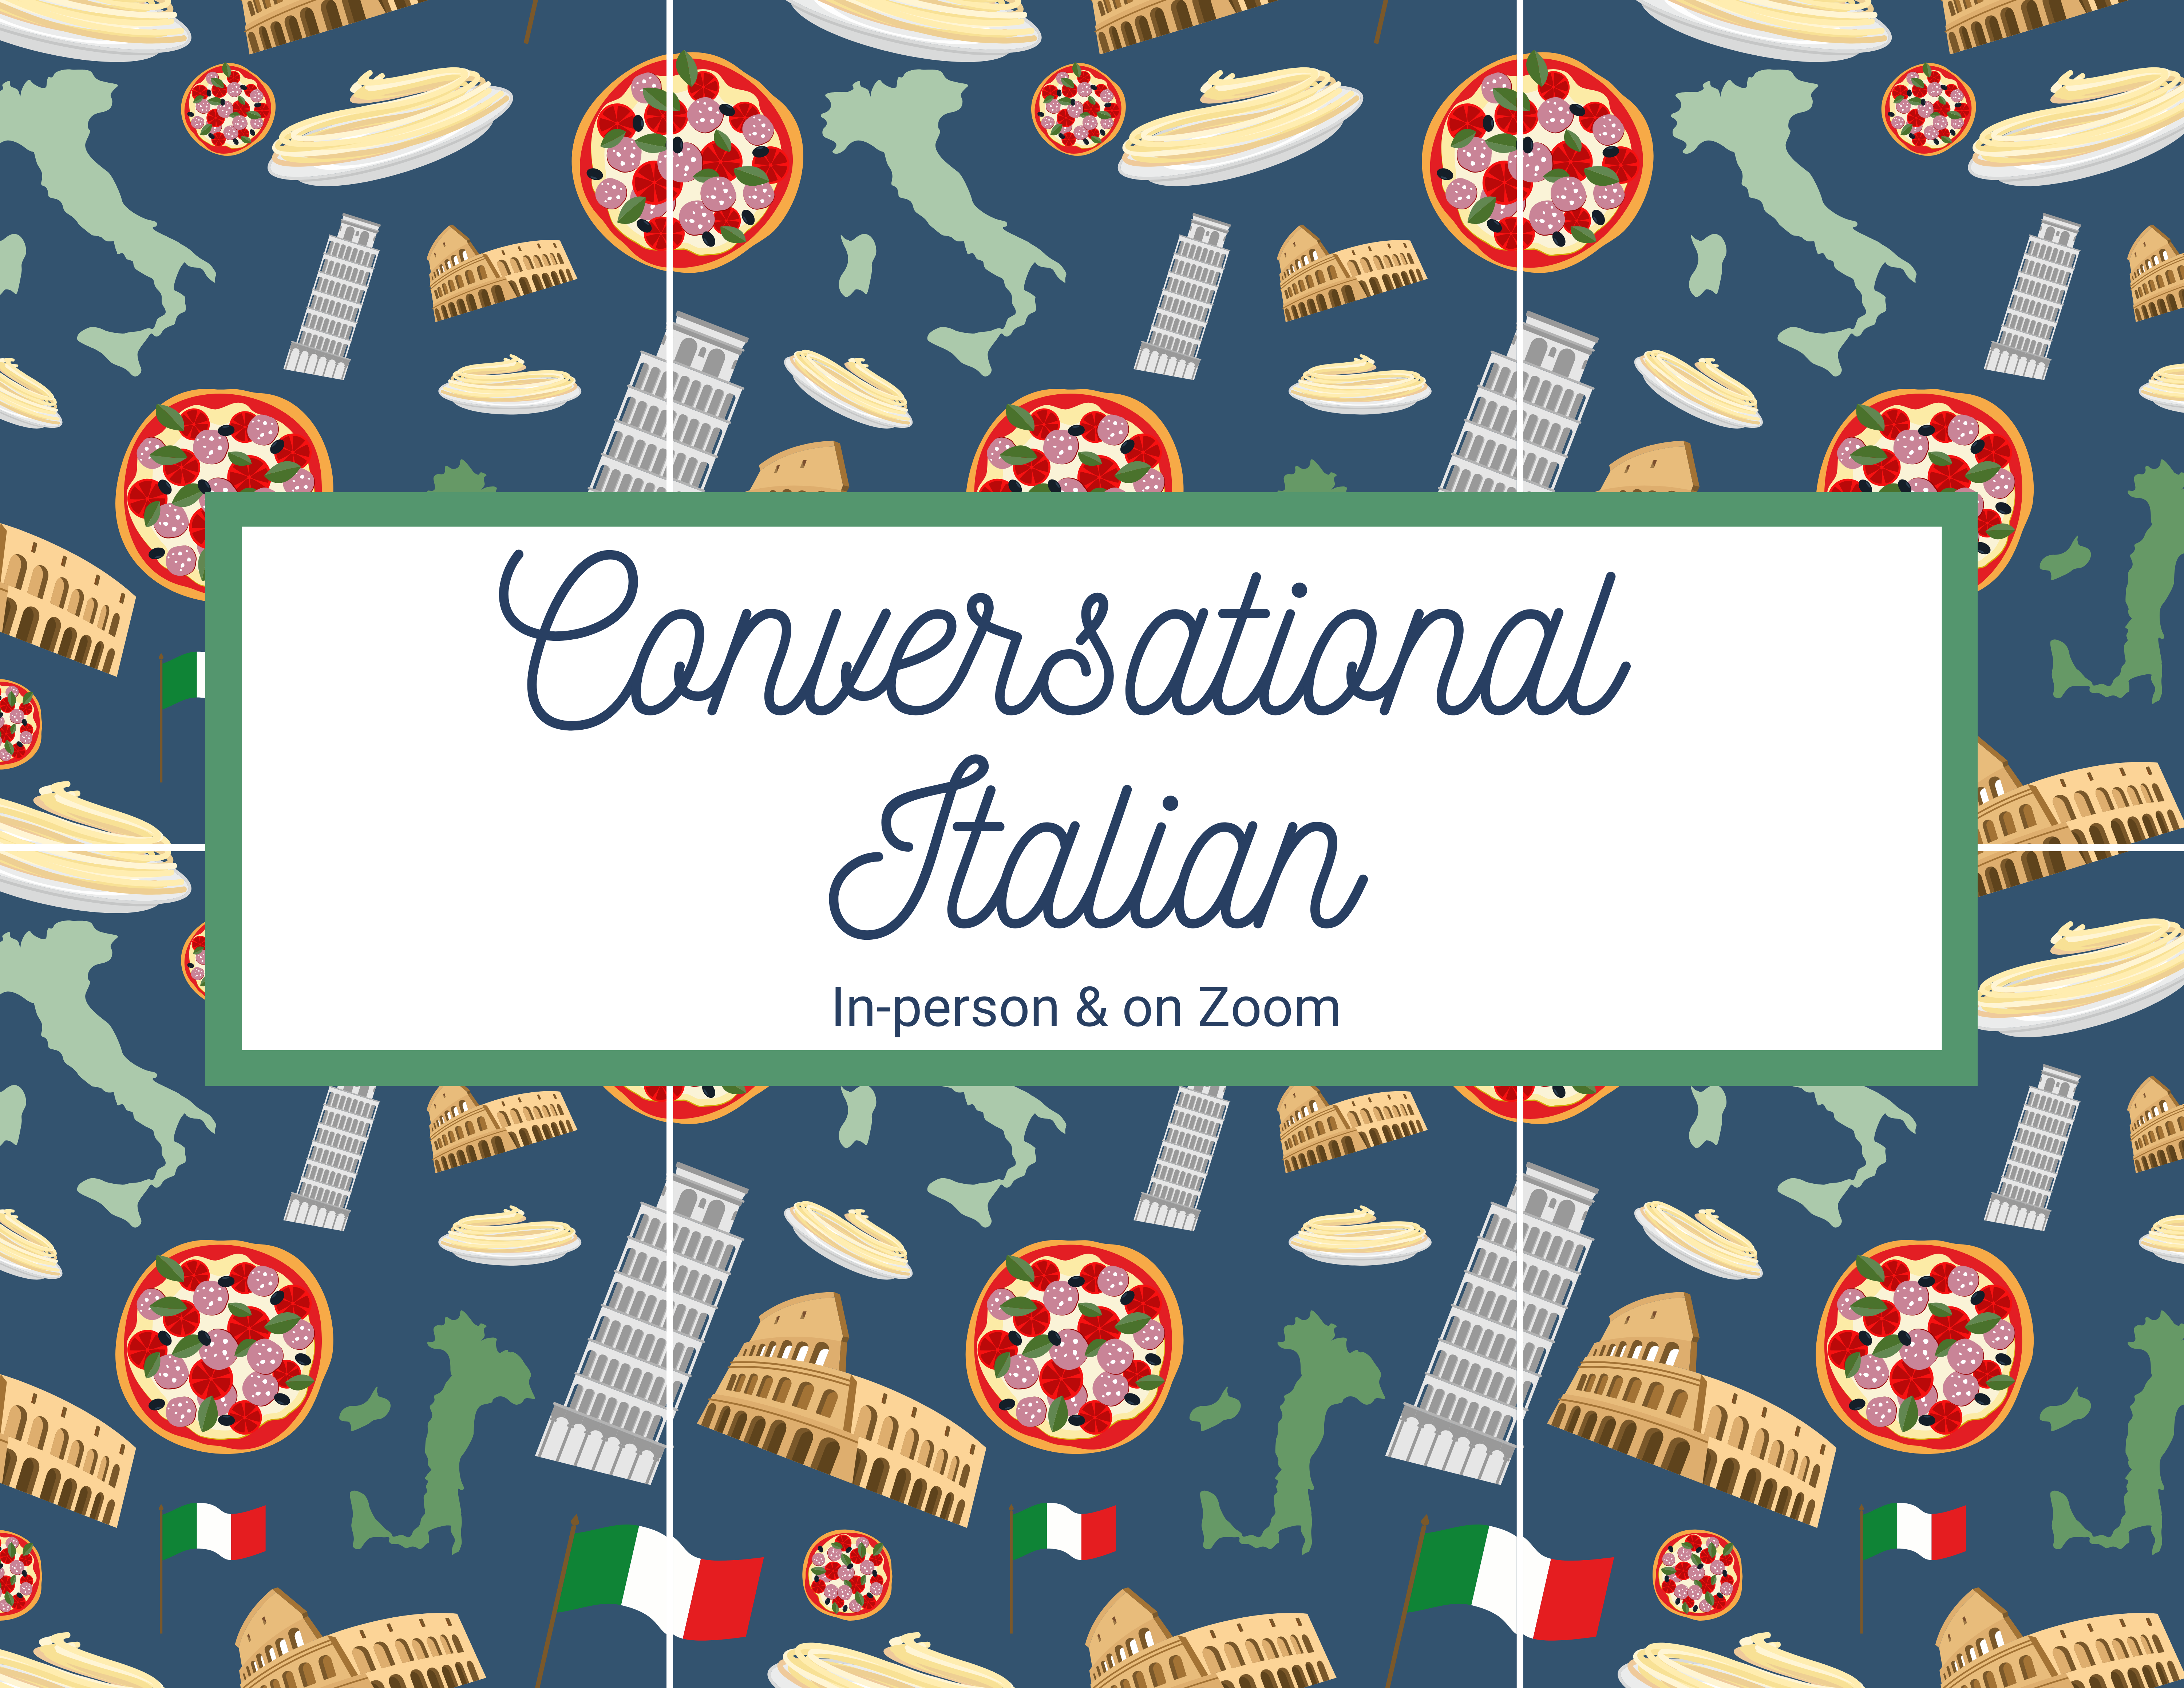 [A collage of Italian images - pizza, pasta, the Tower of Pisa, the colosseum - on a dark blue background] Conversational Italian | In-person & On Zoom 